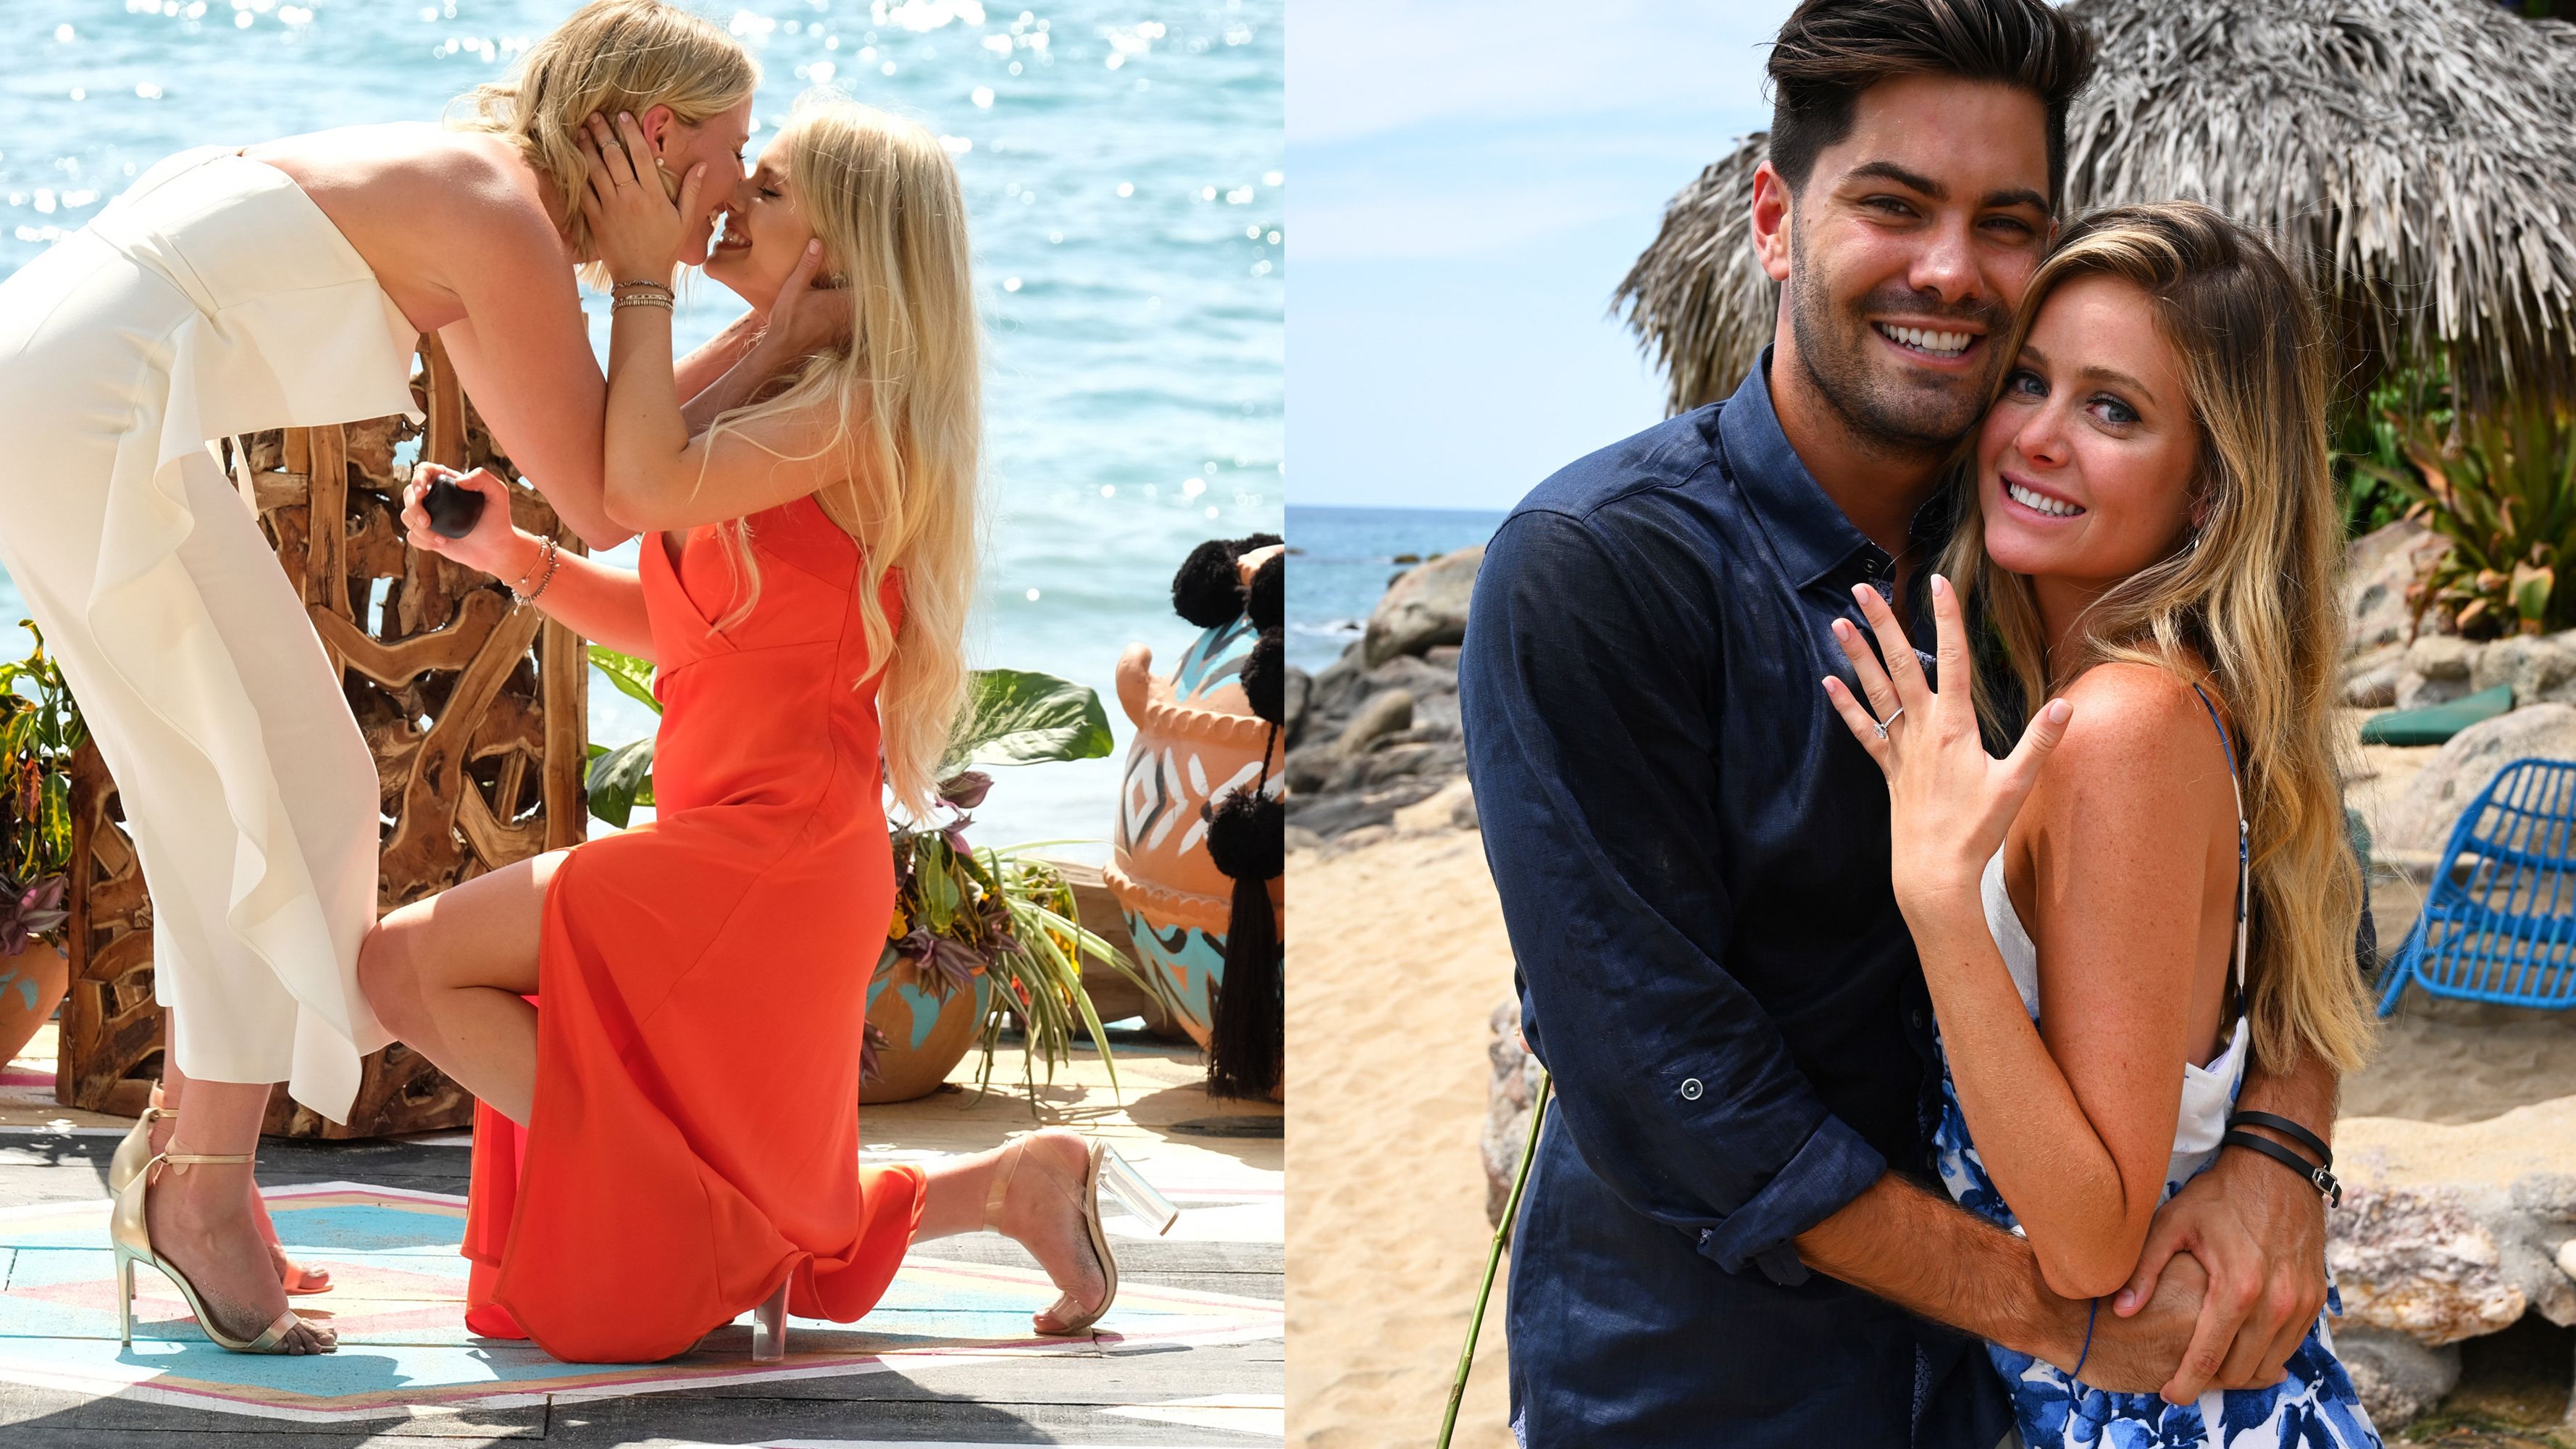 Chris Bukowski and Elise Mosca: Already Over After Bachelor in Paradise!